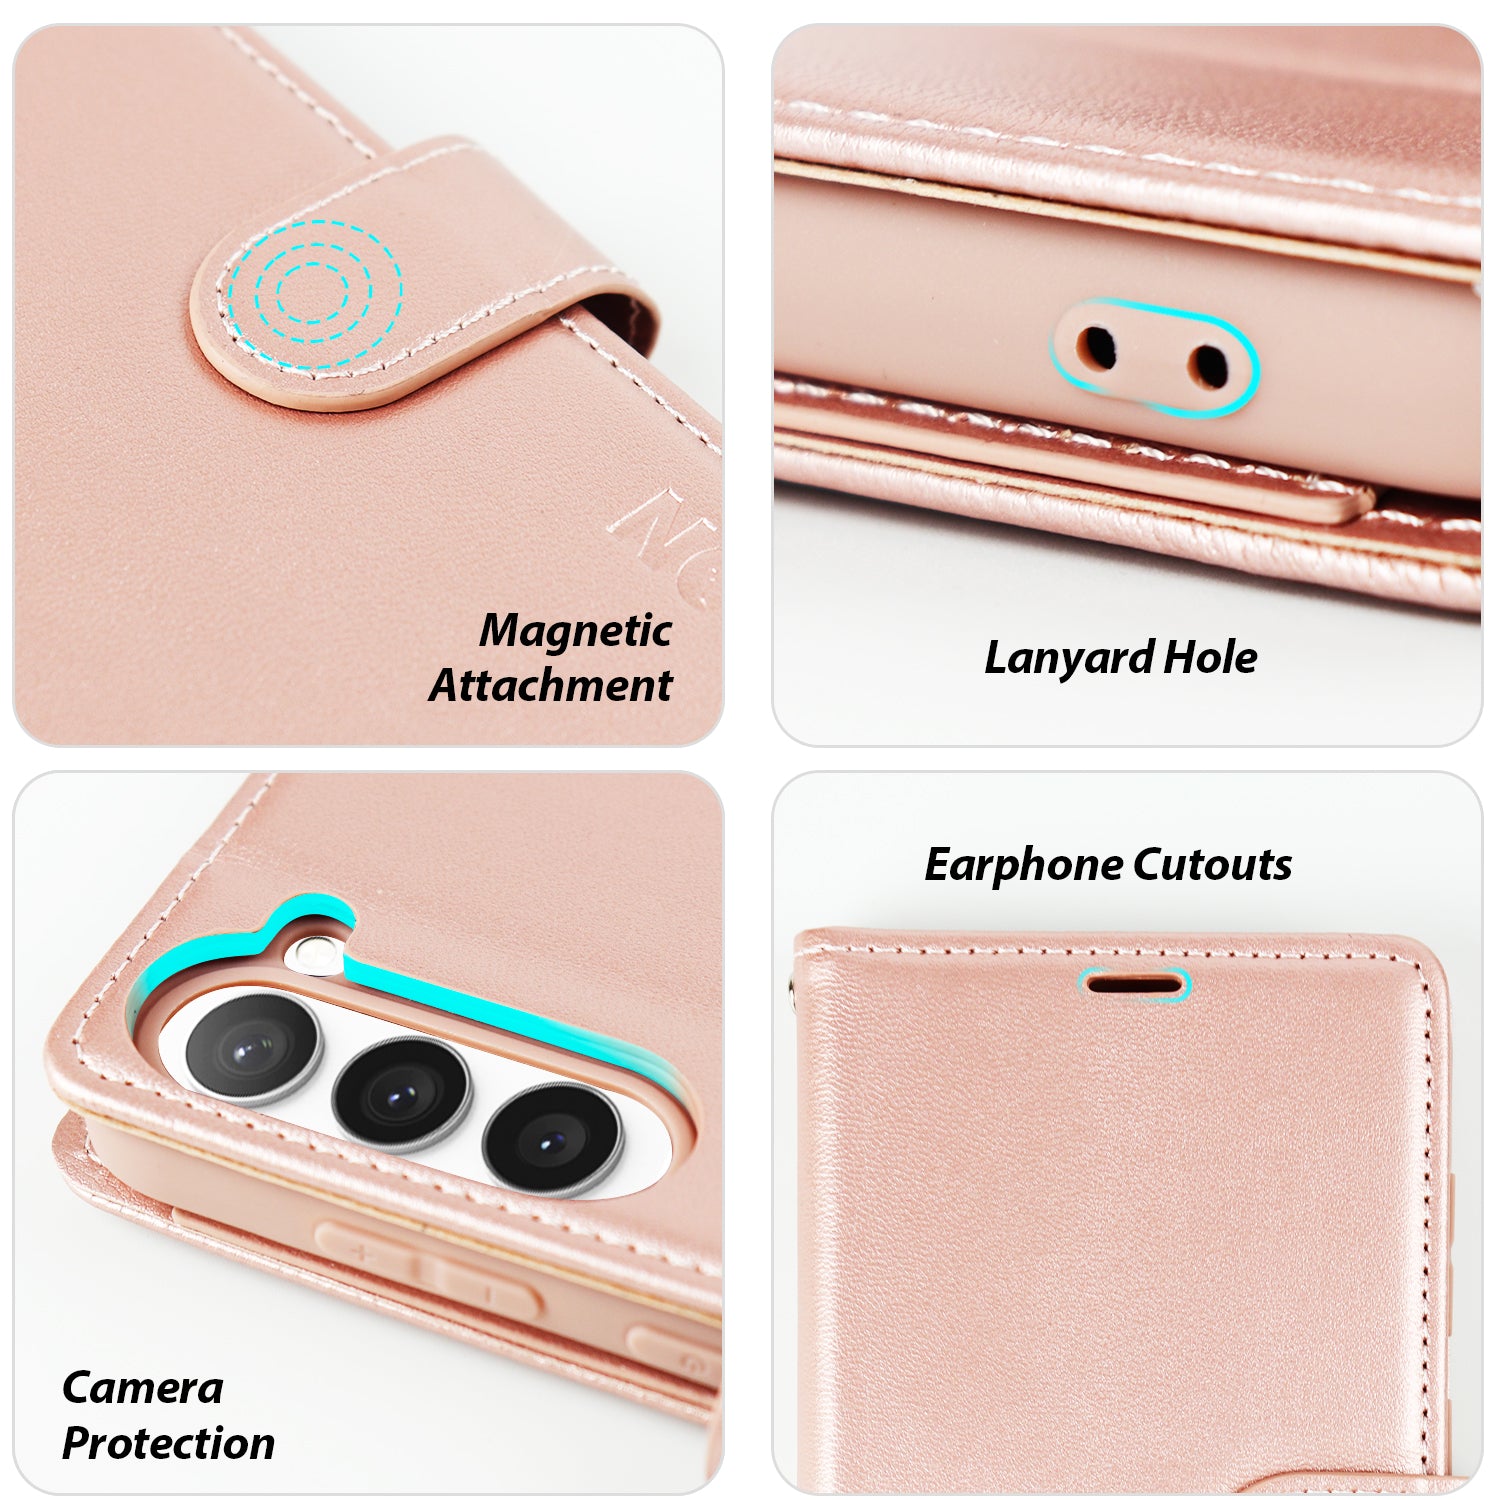 Tough On Samsung Galaxy S23 Flip Wallet Leather Case Rose Gold